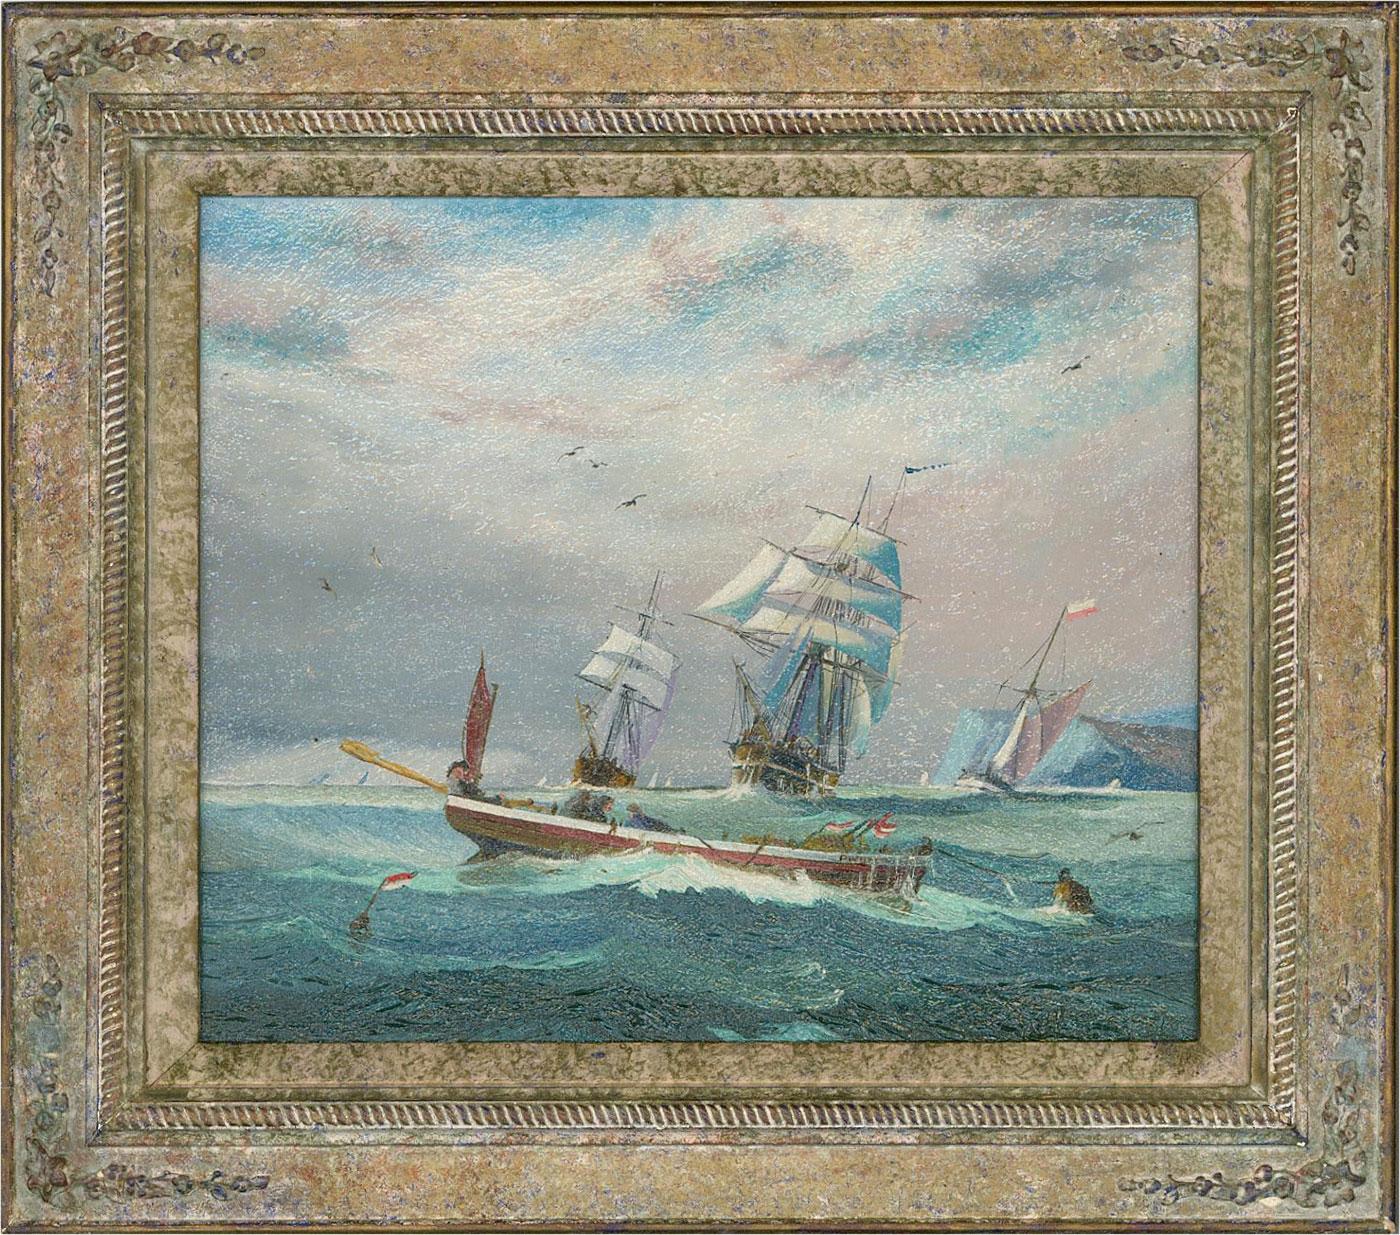 A seascape depicting a rowing boat crossing the waves with larger clipper ships in the background. Presented in a distressed gilt-effect wooden frame. The signature is etched into the paint at the lower-right edge. On canvas on stretchers.
